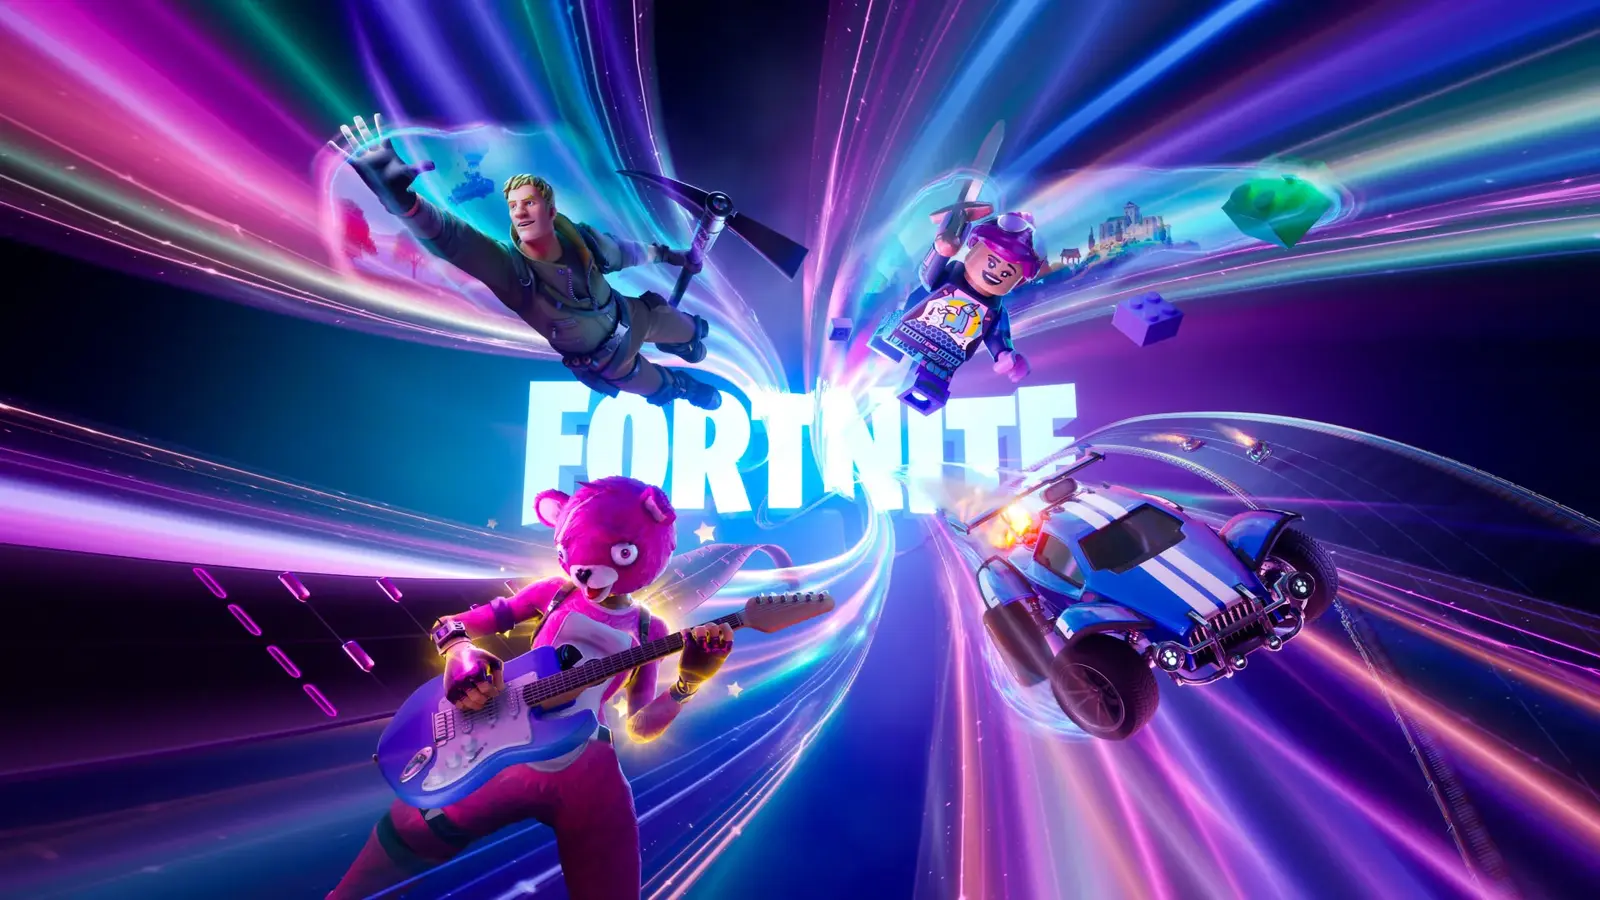 Joystick drift issue plaguing Fortnite after the latest update